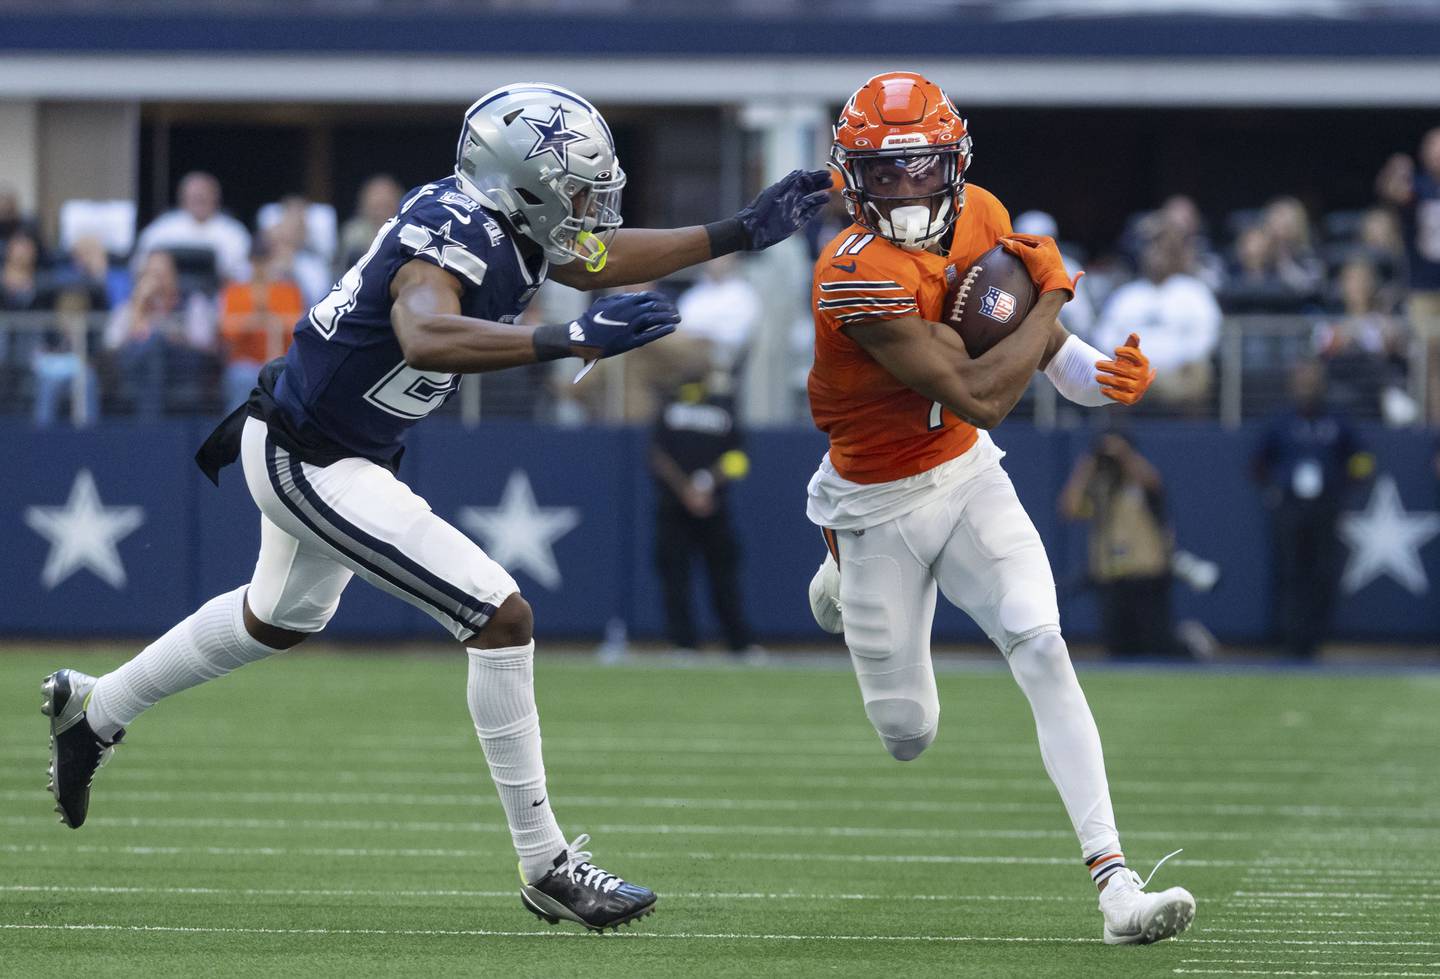 Bears wide receiver Darnell Mooney makes a reception ahead of Cowboys safety Israel Mukuamu in the third quarter on Oct. 30, 2022.